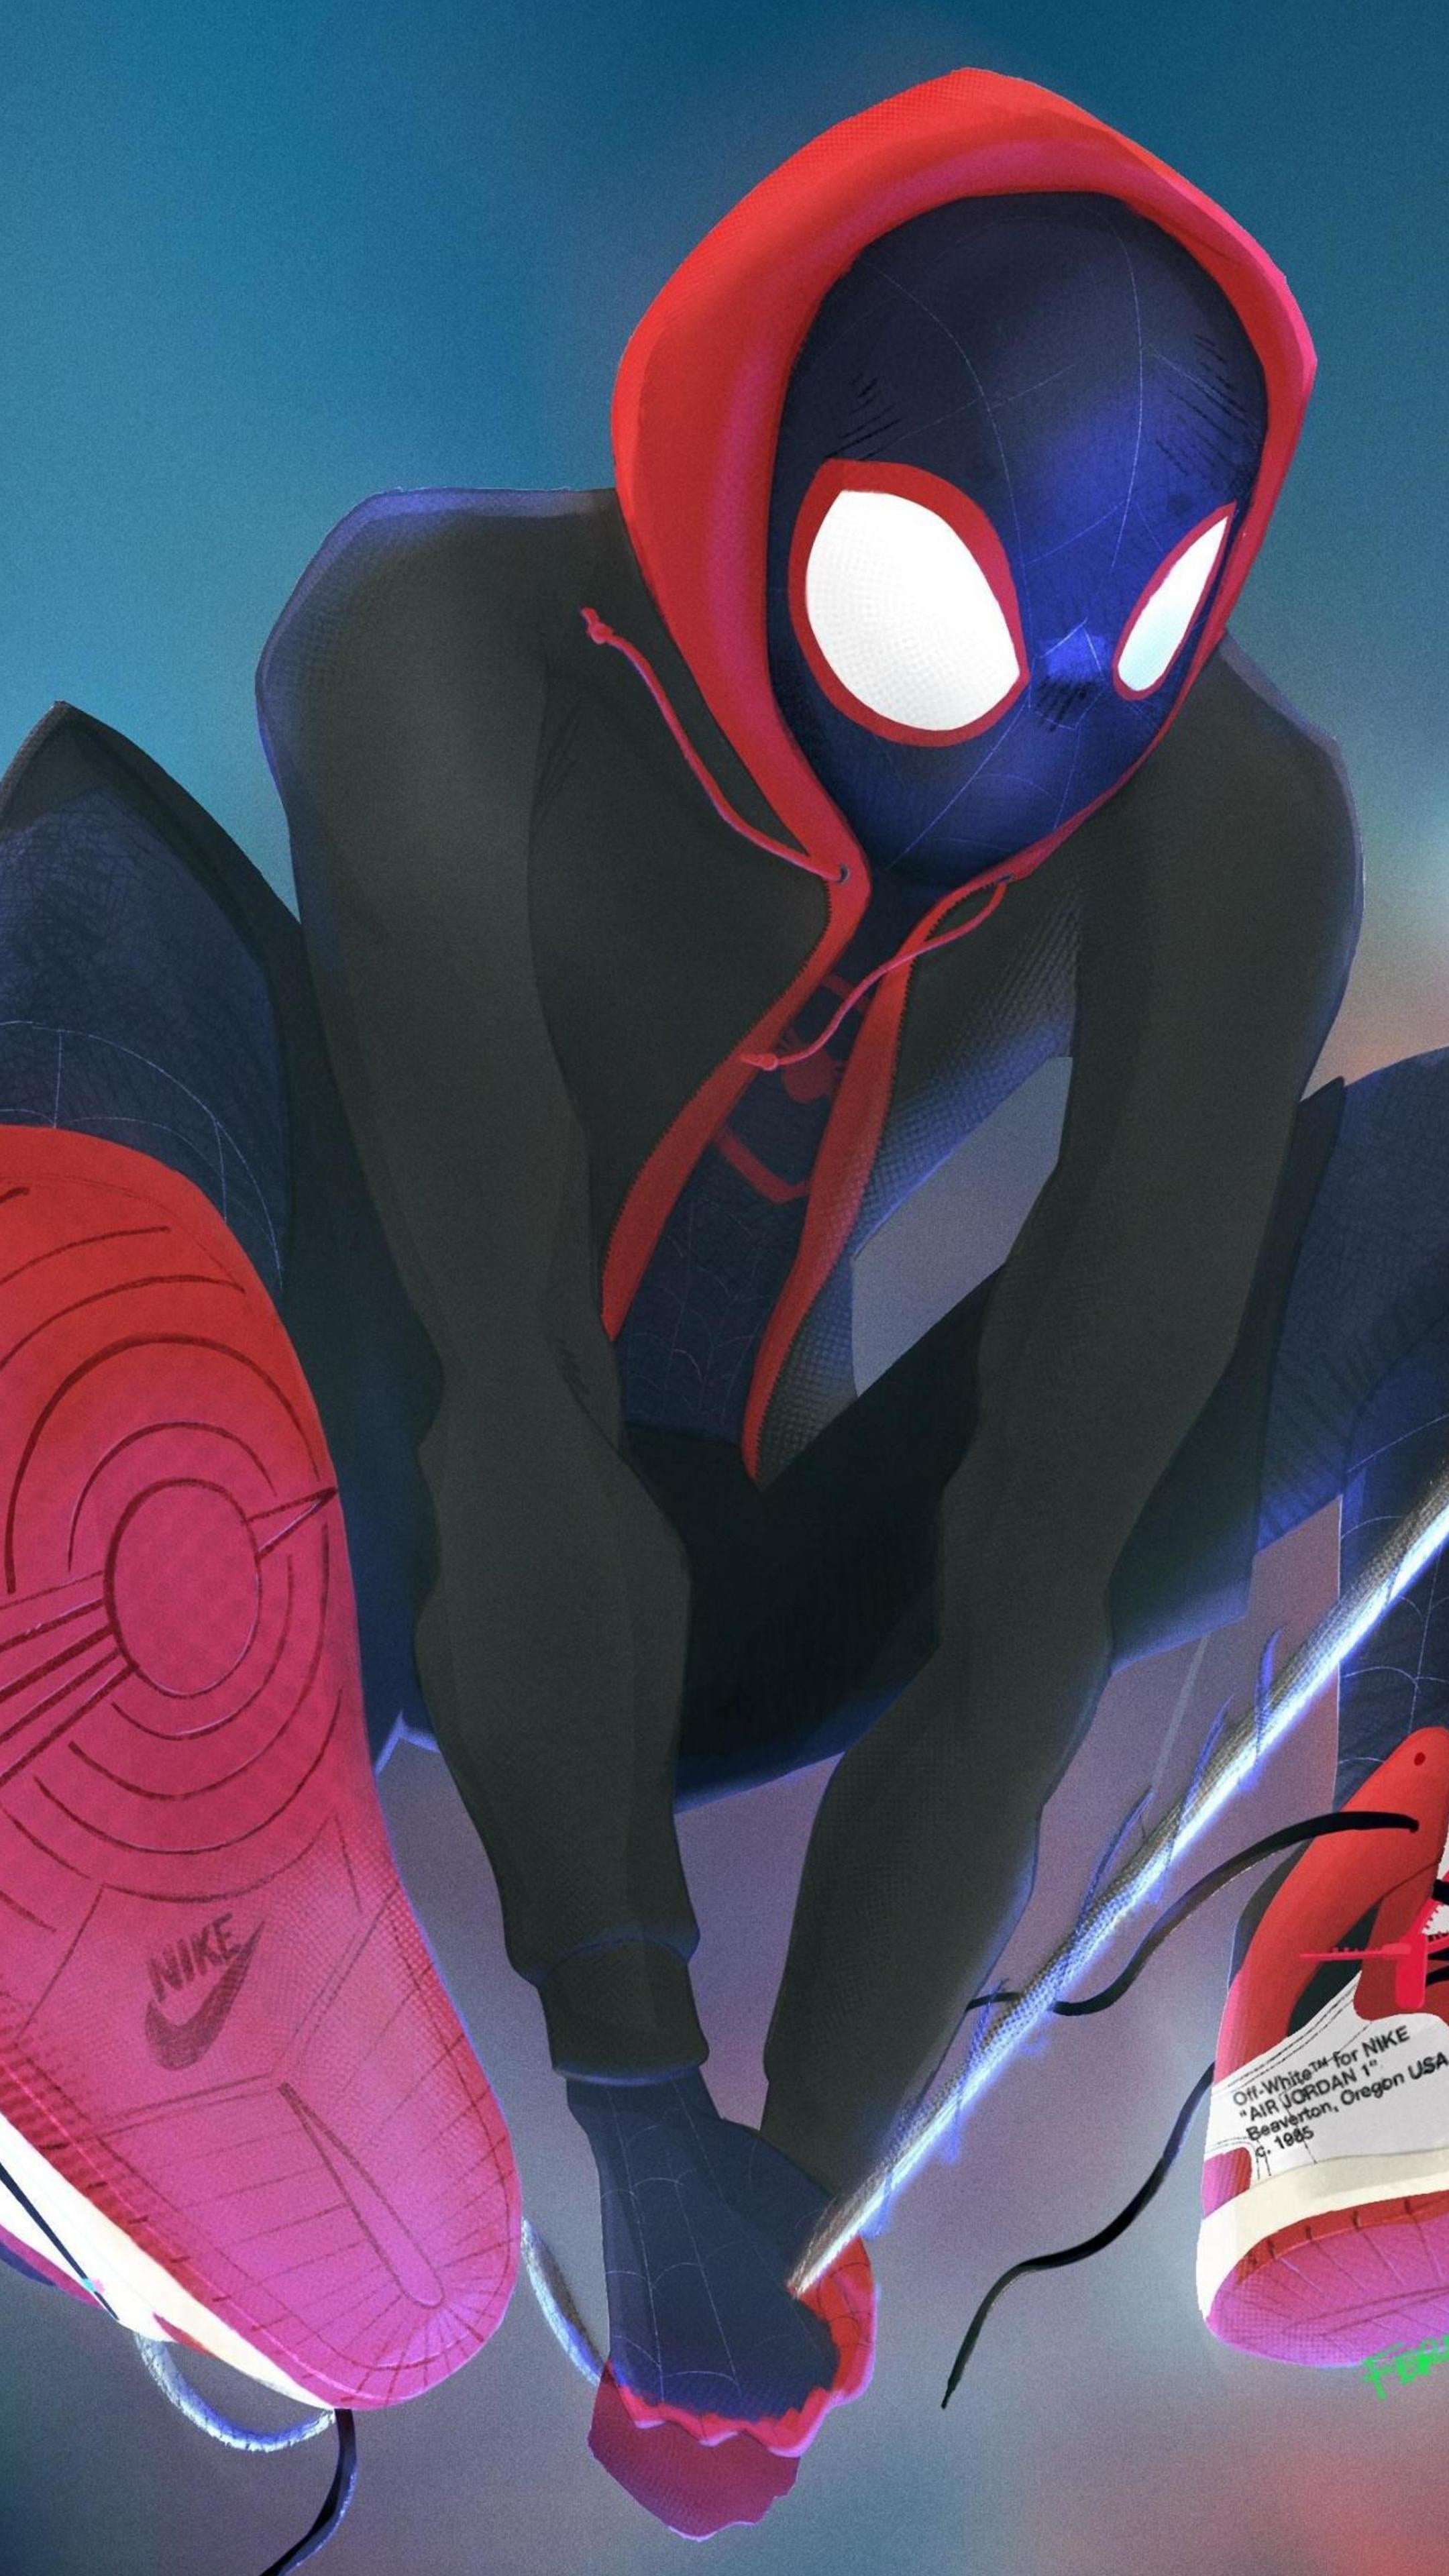 Miles Morales Wallpapers  Top 65 Best Spider Man Miles Morales Backgrounds